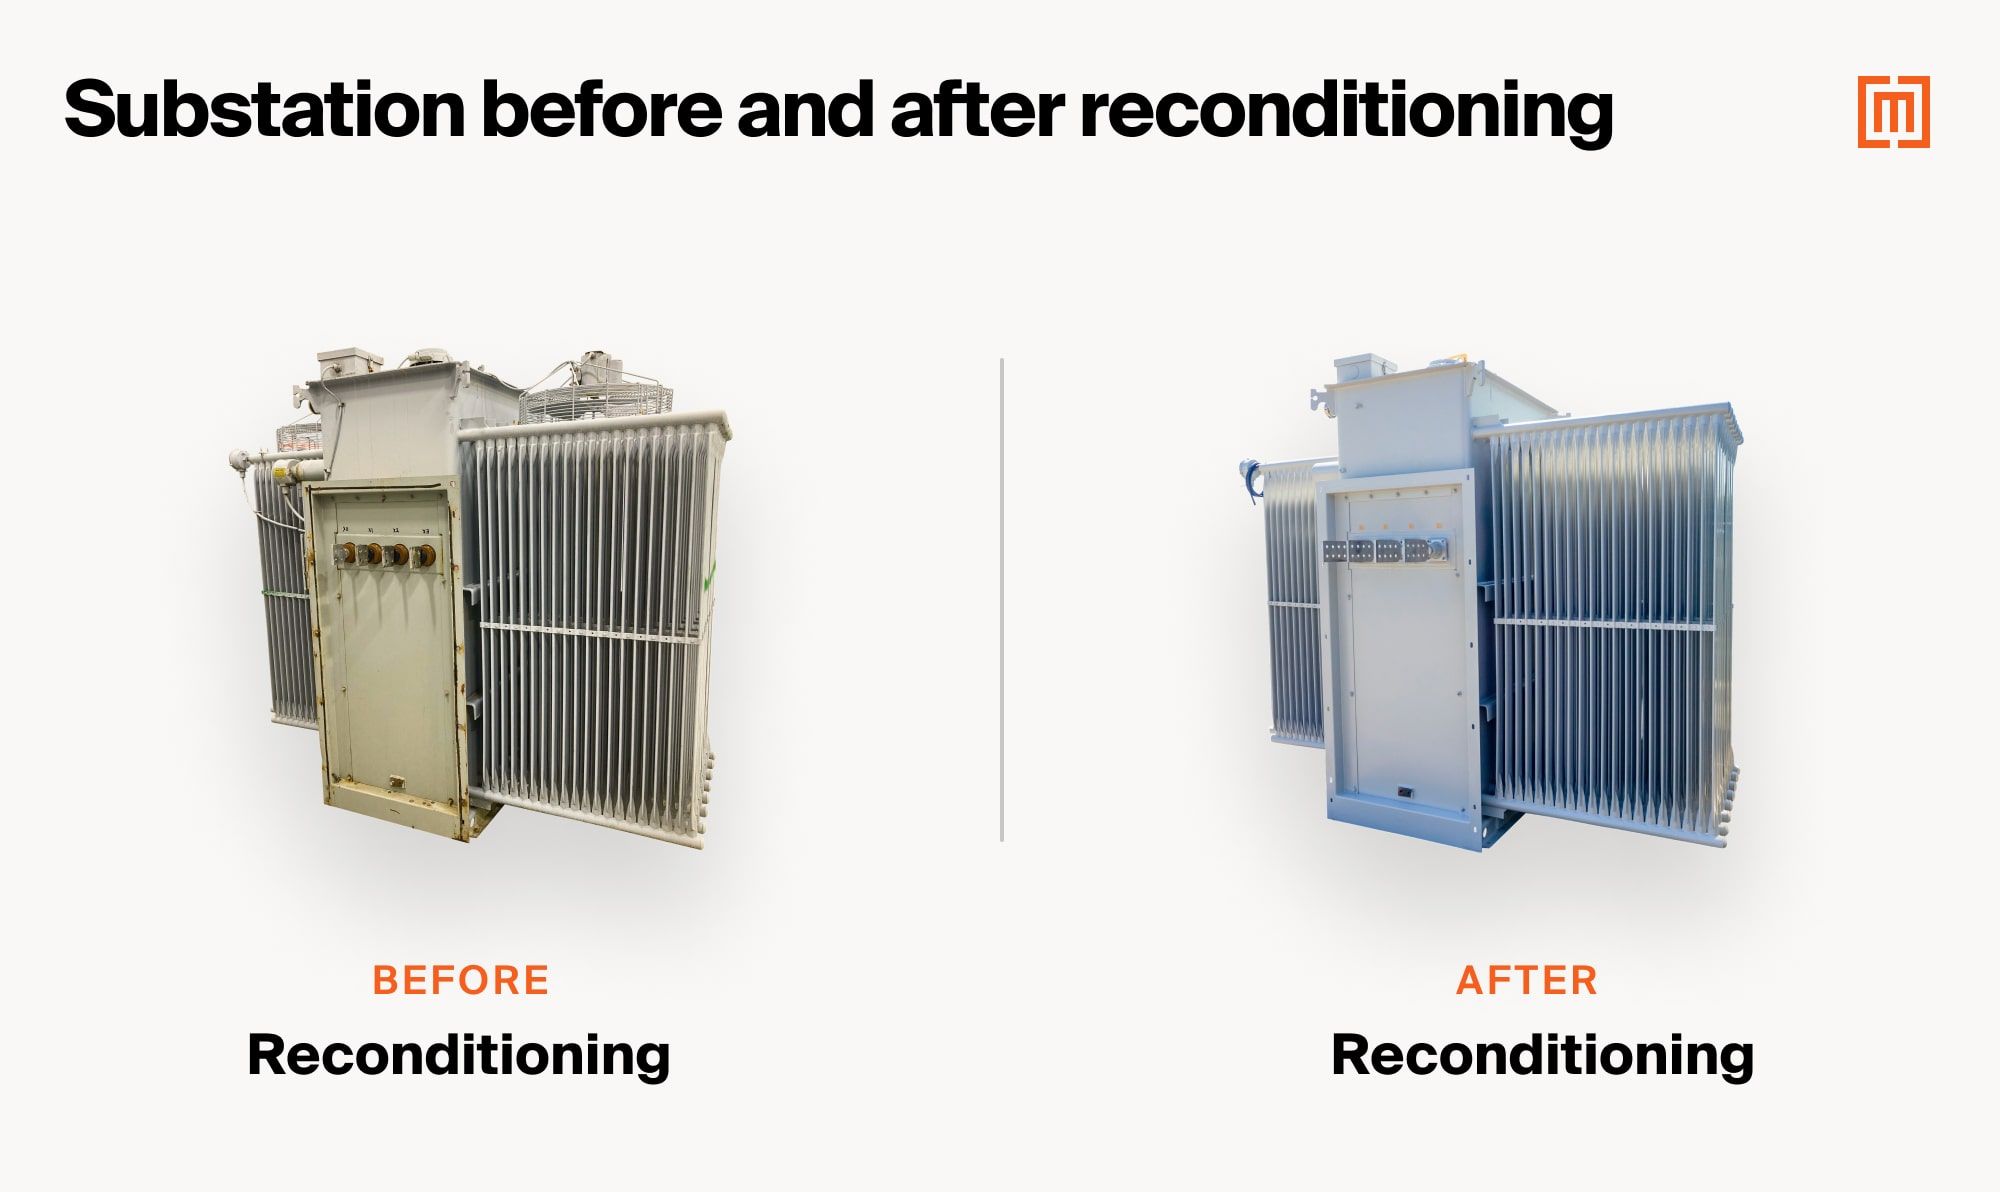 Images of a substation transformer before and after Maddox reconditioned it